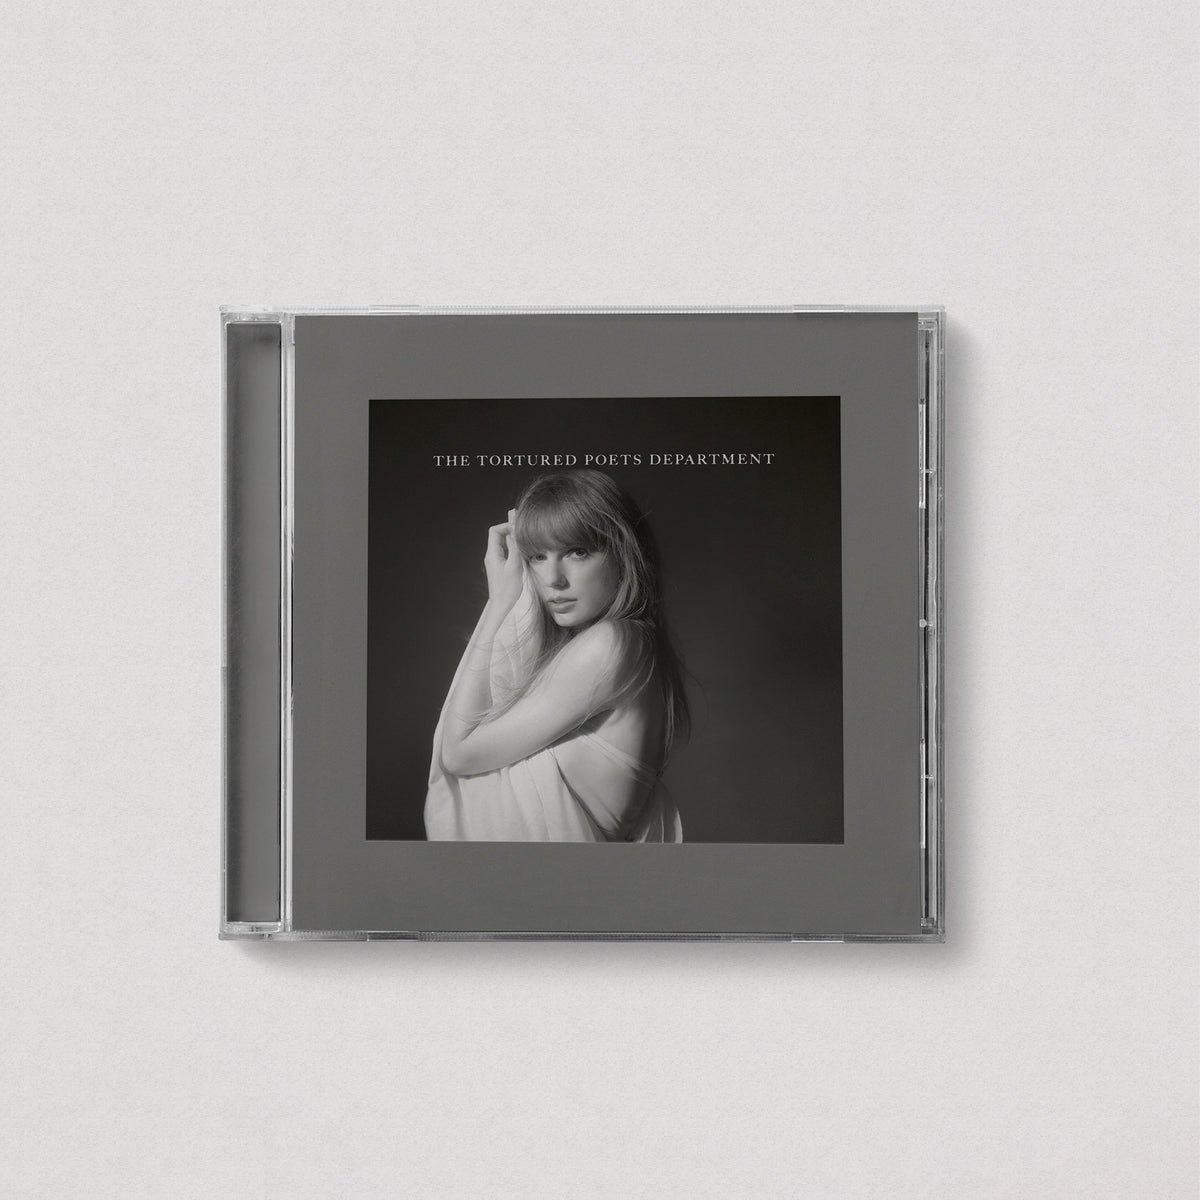 Taylor Swift - The Tortured Poets Department CD + Bonus Track "Guilty as Sin? (Acoustic Version)" (Exclusive, CD)